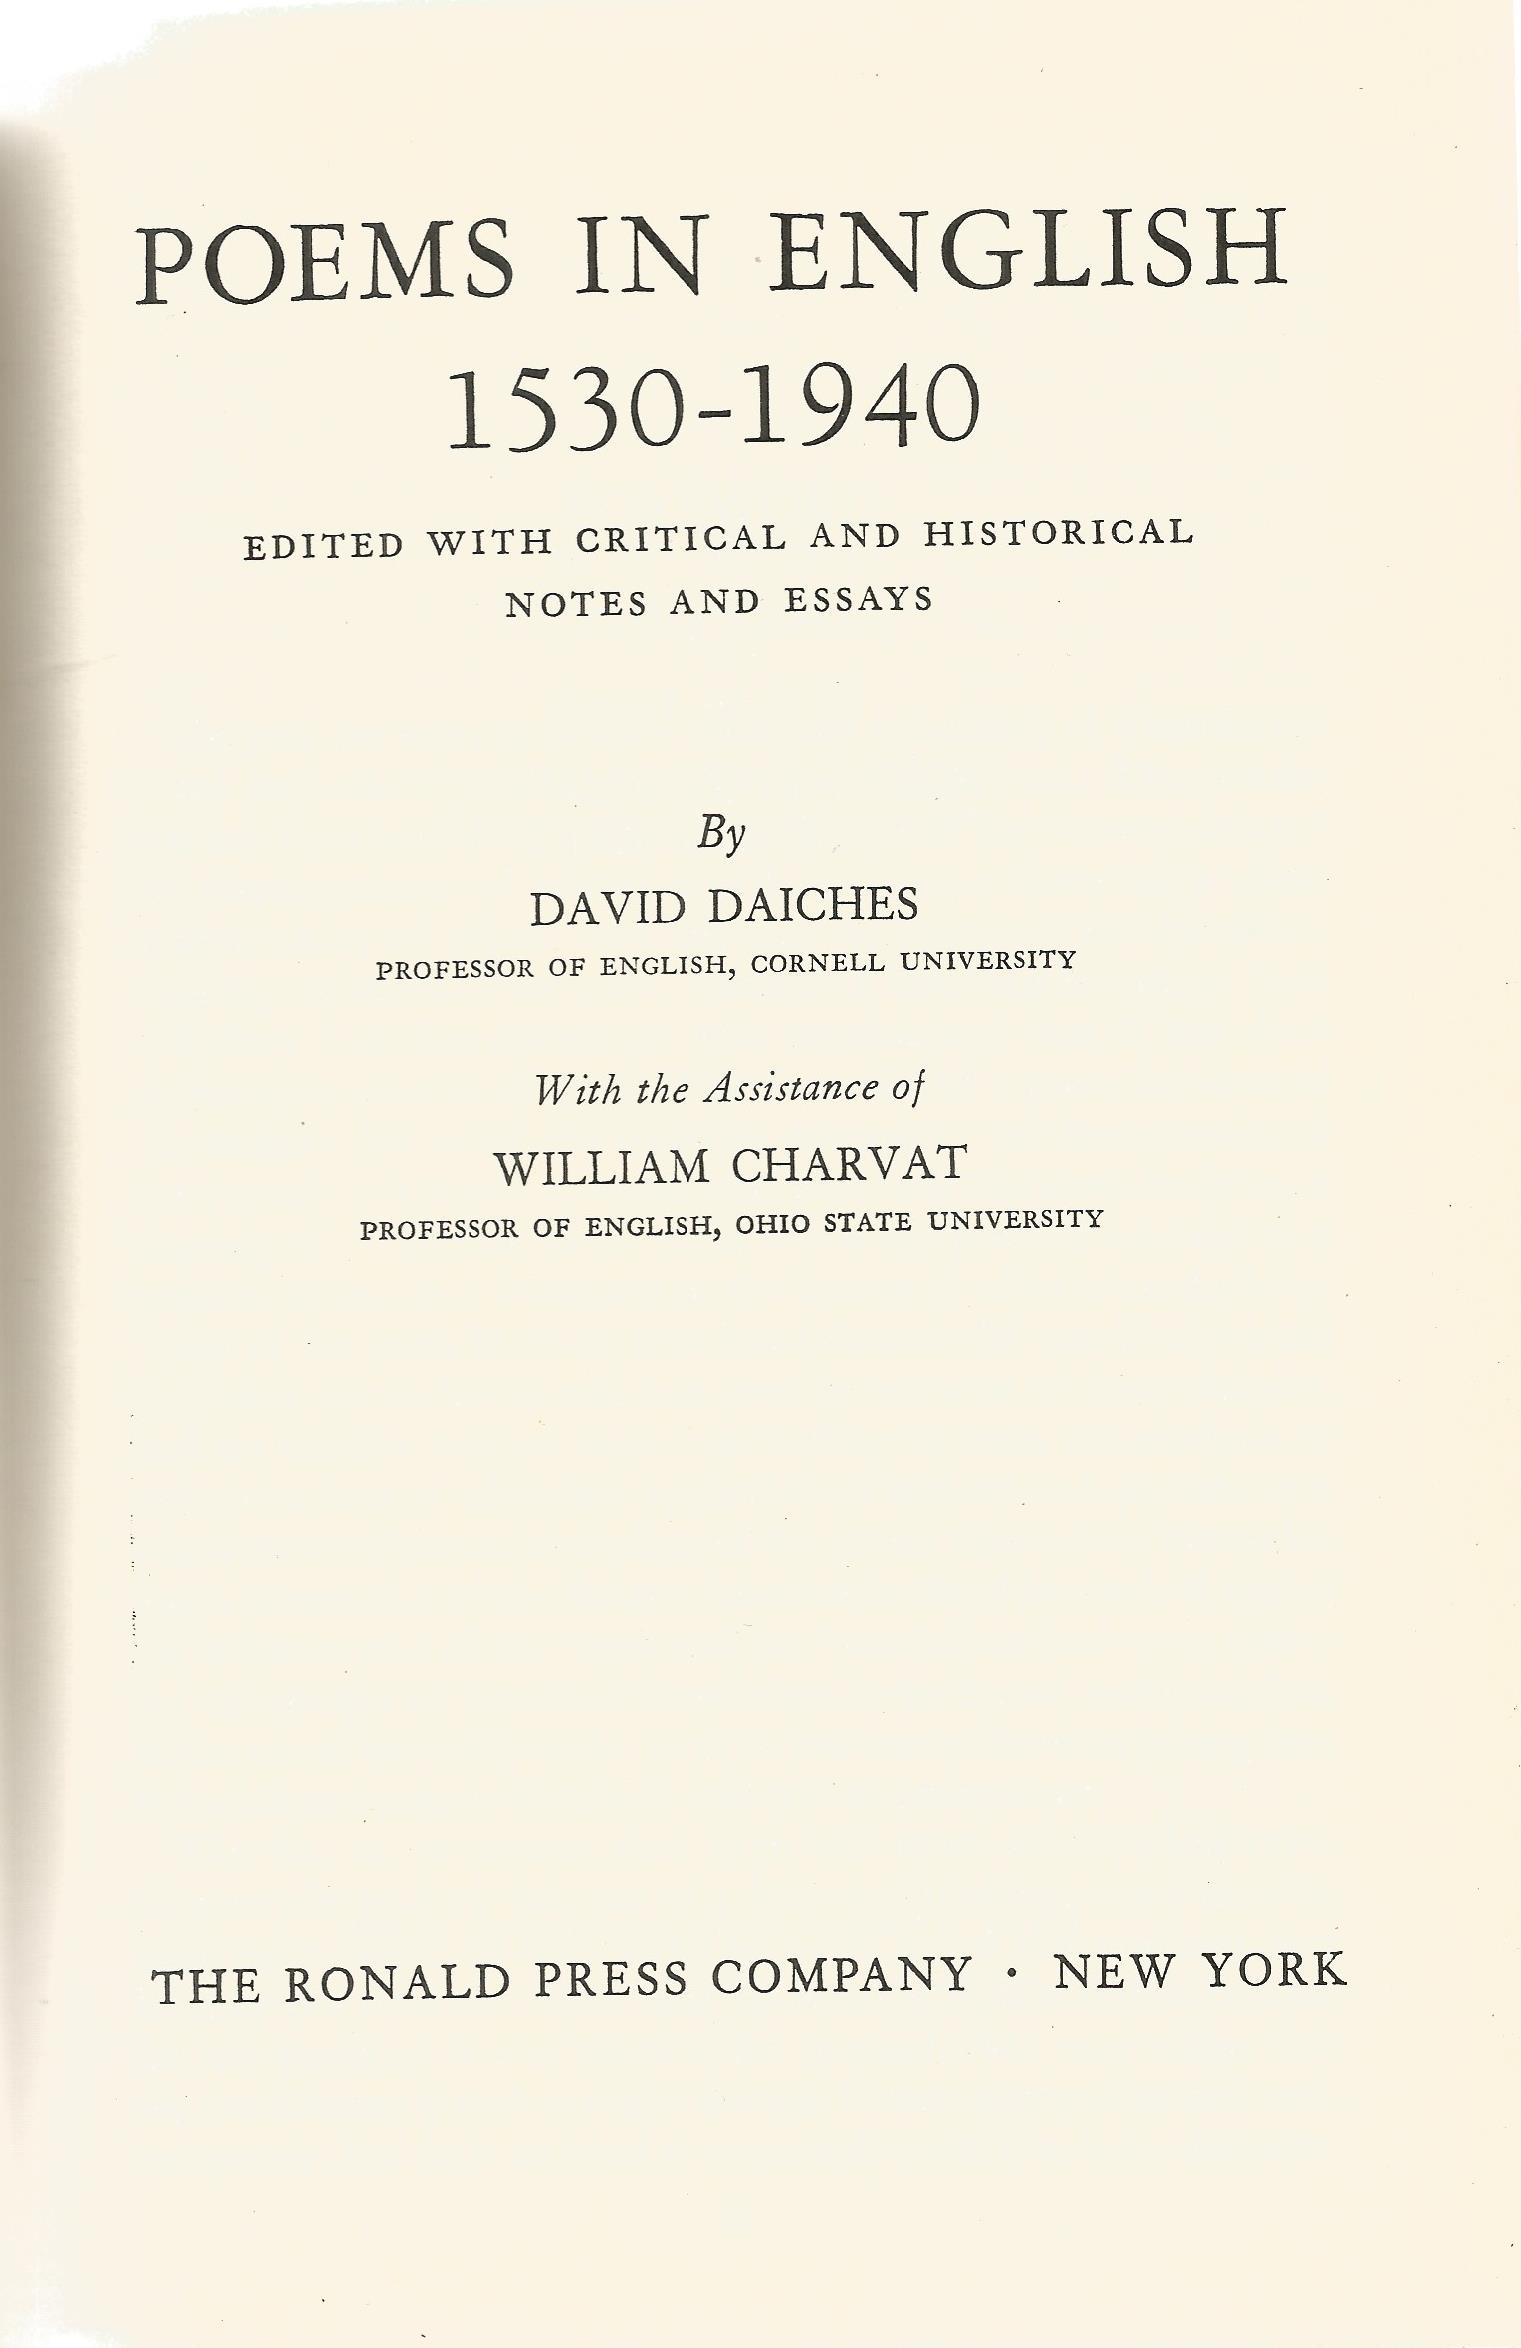 Poems in English 1530 1940 by David Daiches Hardback Book 1950 First Edition published by The Ronald - Image 2 of 3